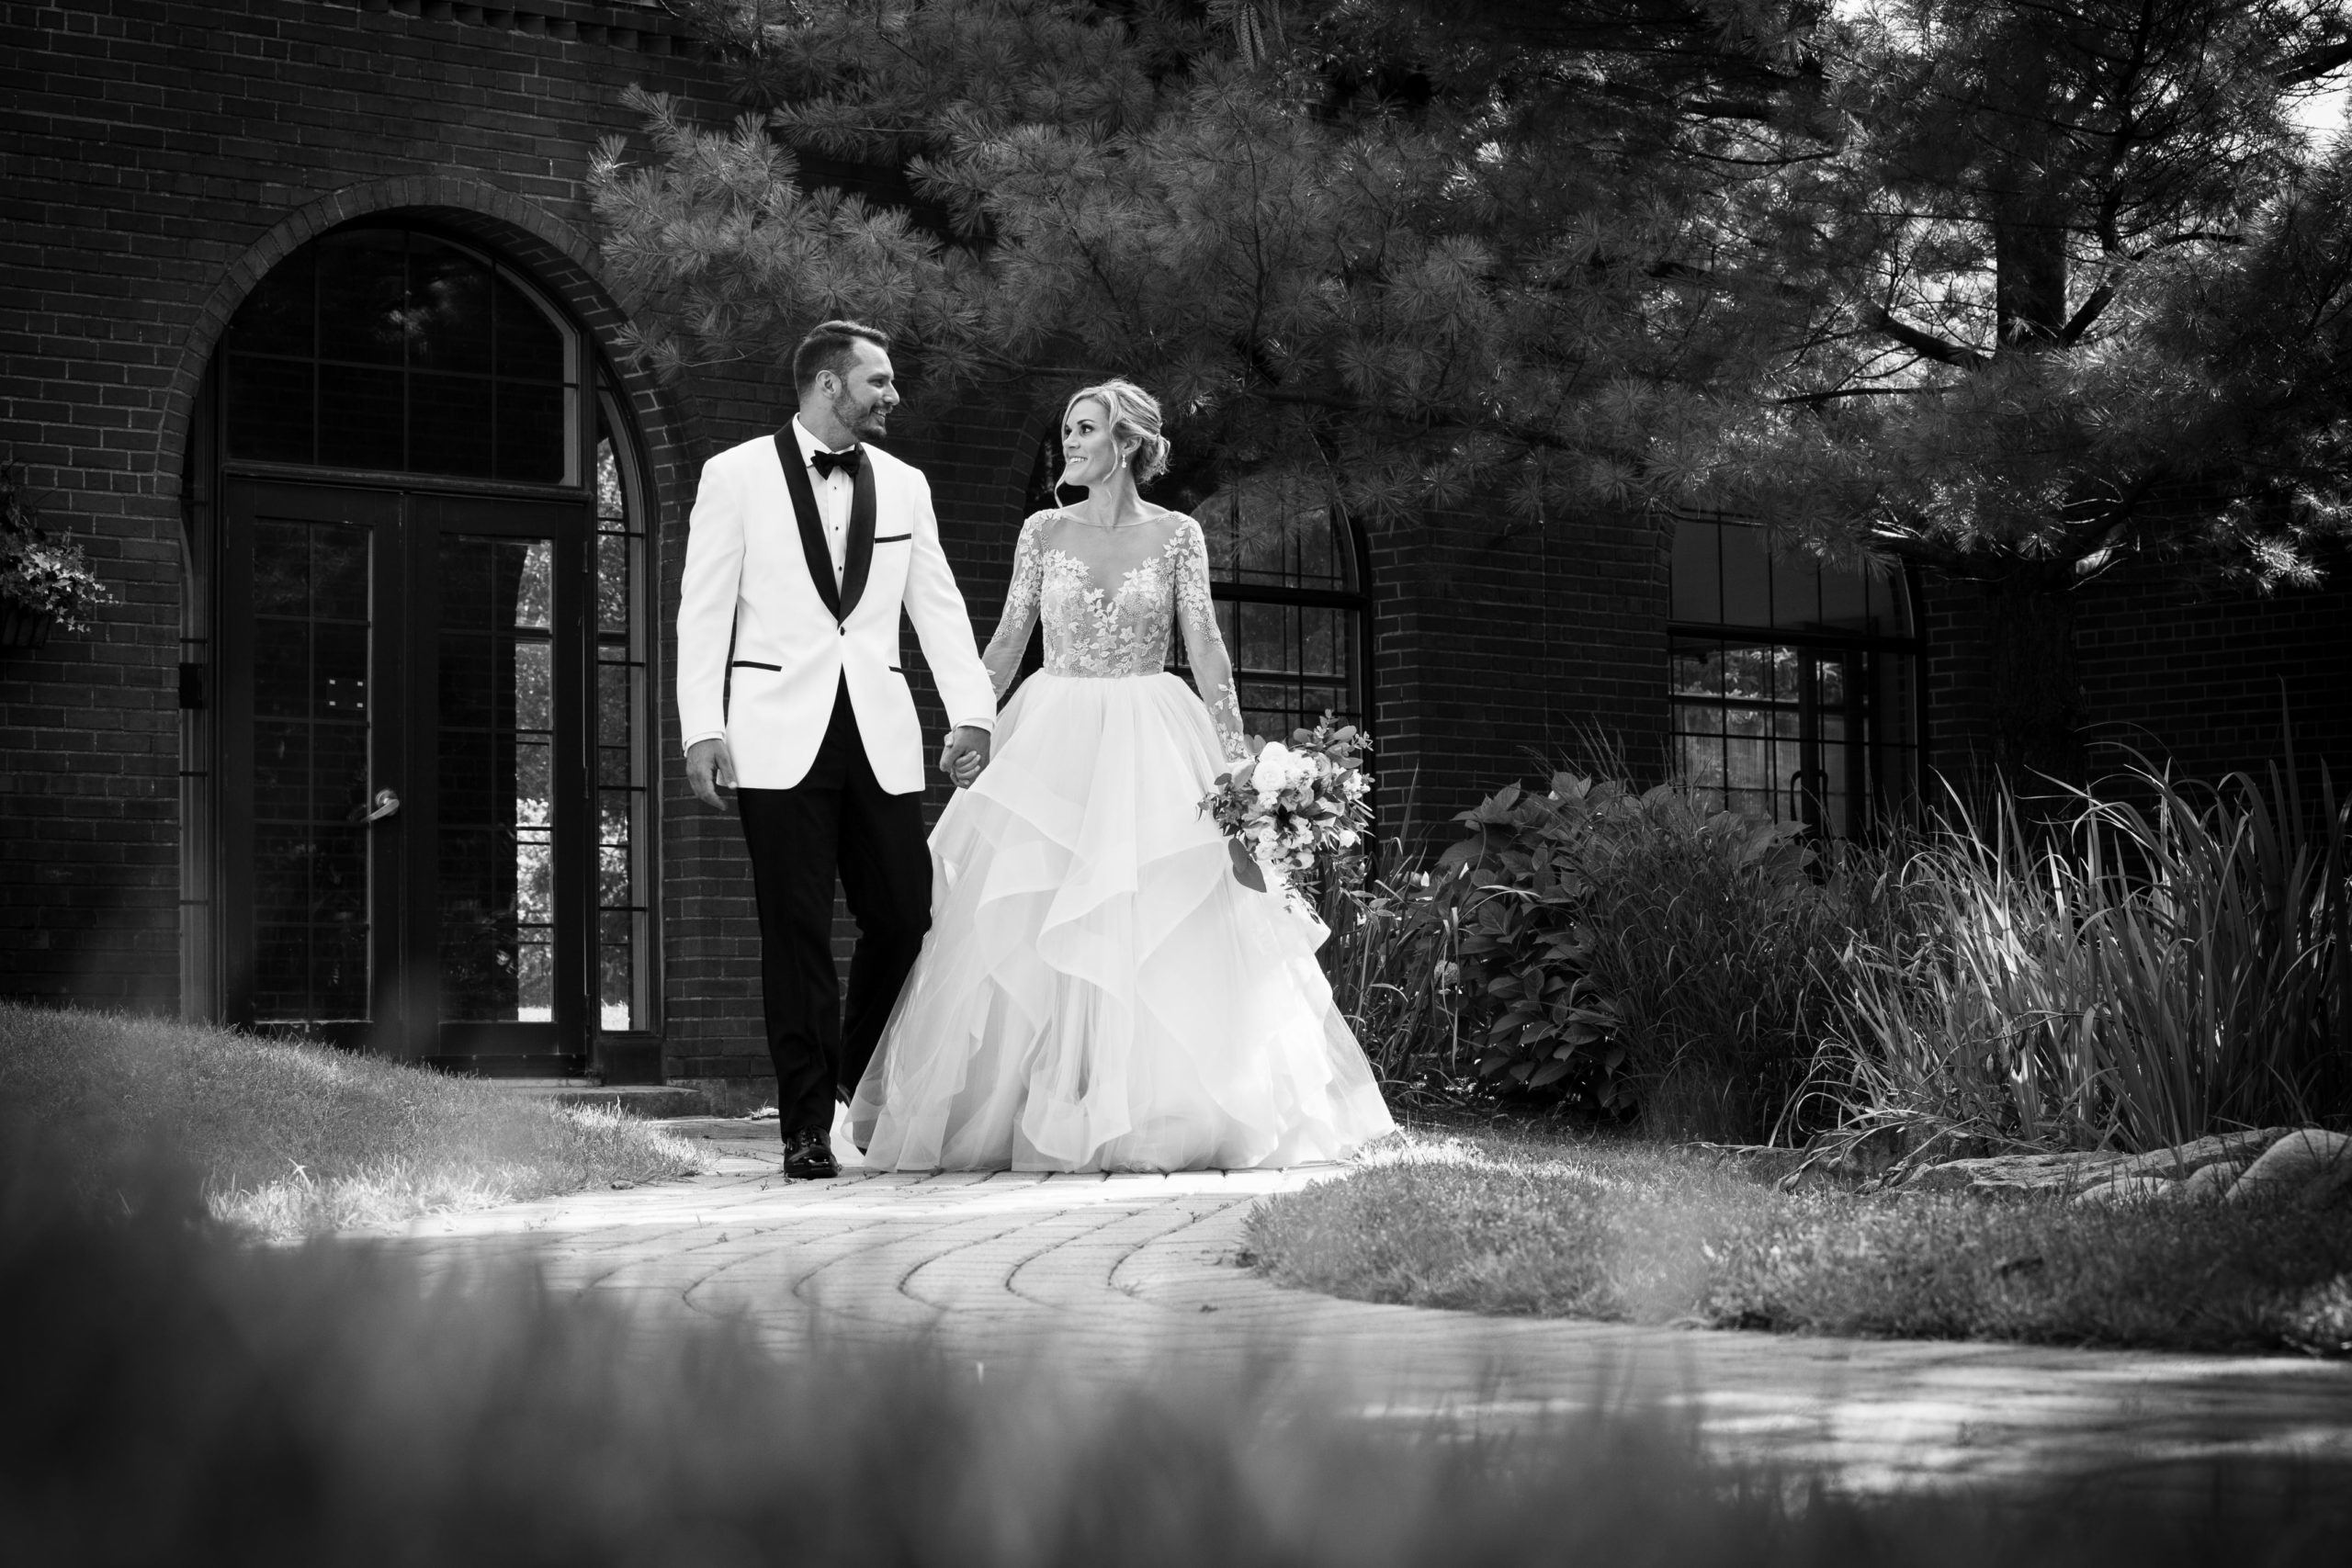 photo-journalistic bride and groom photography style